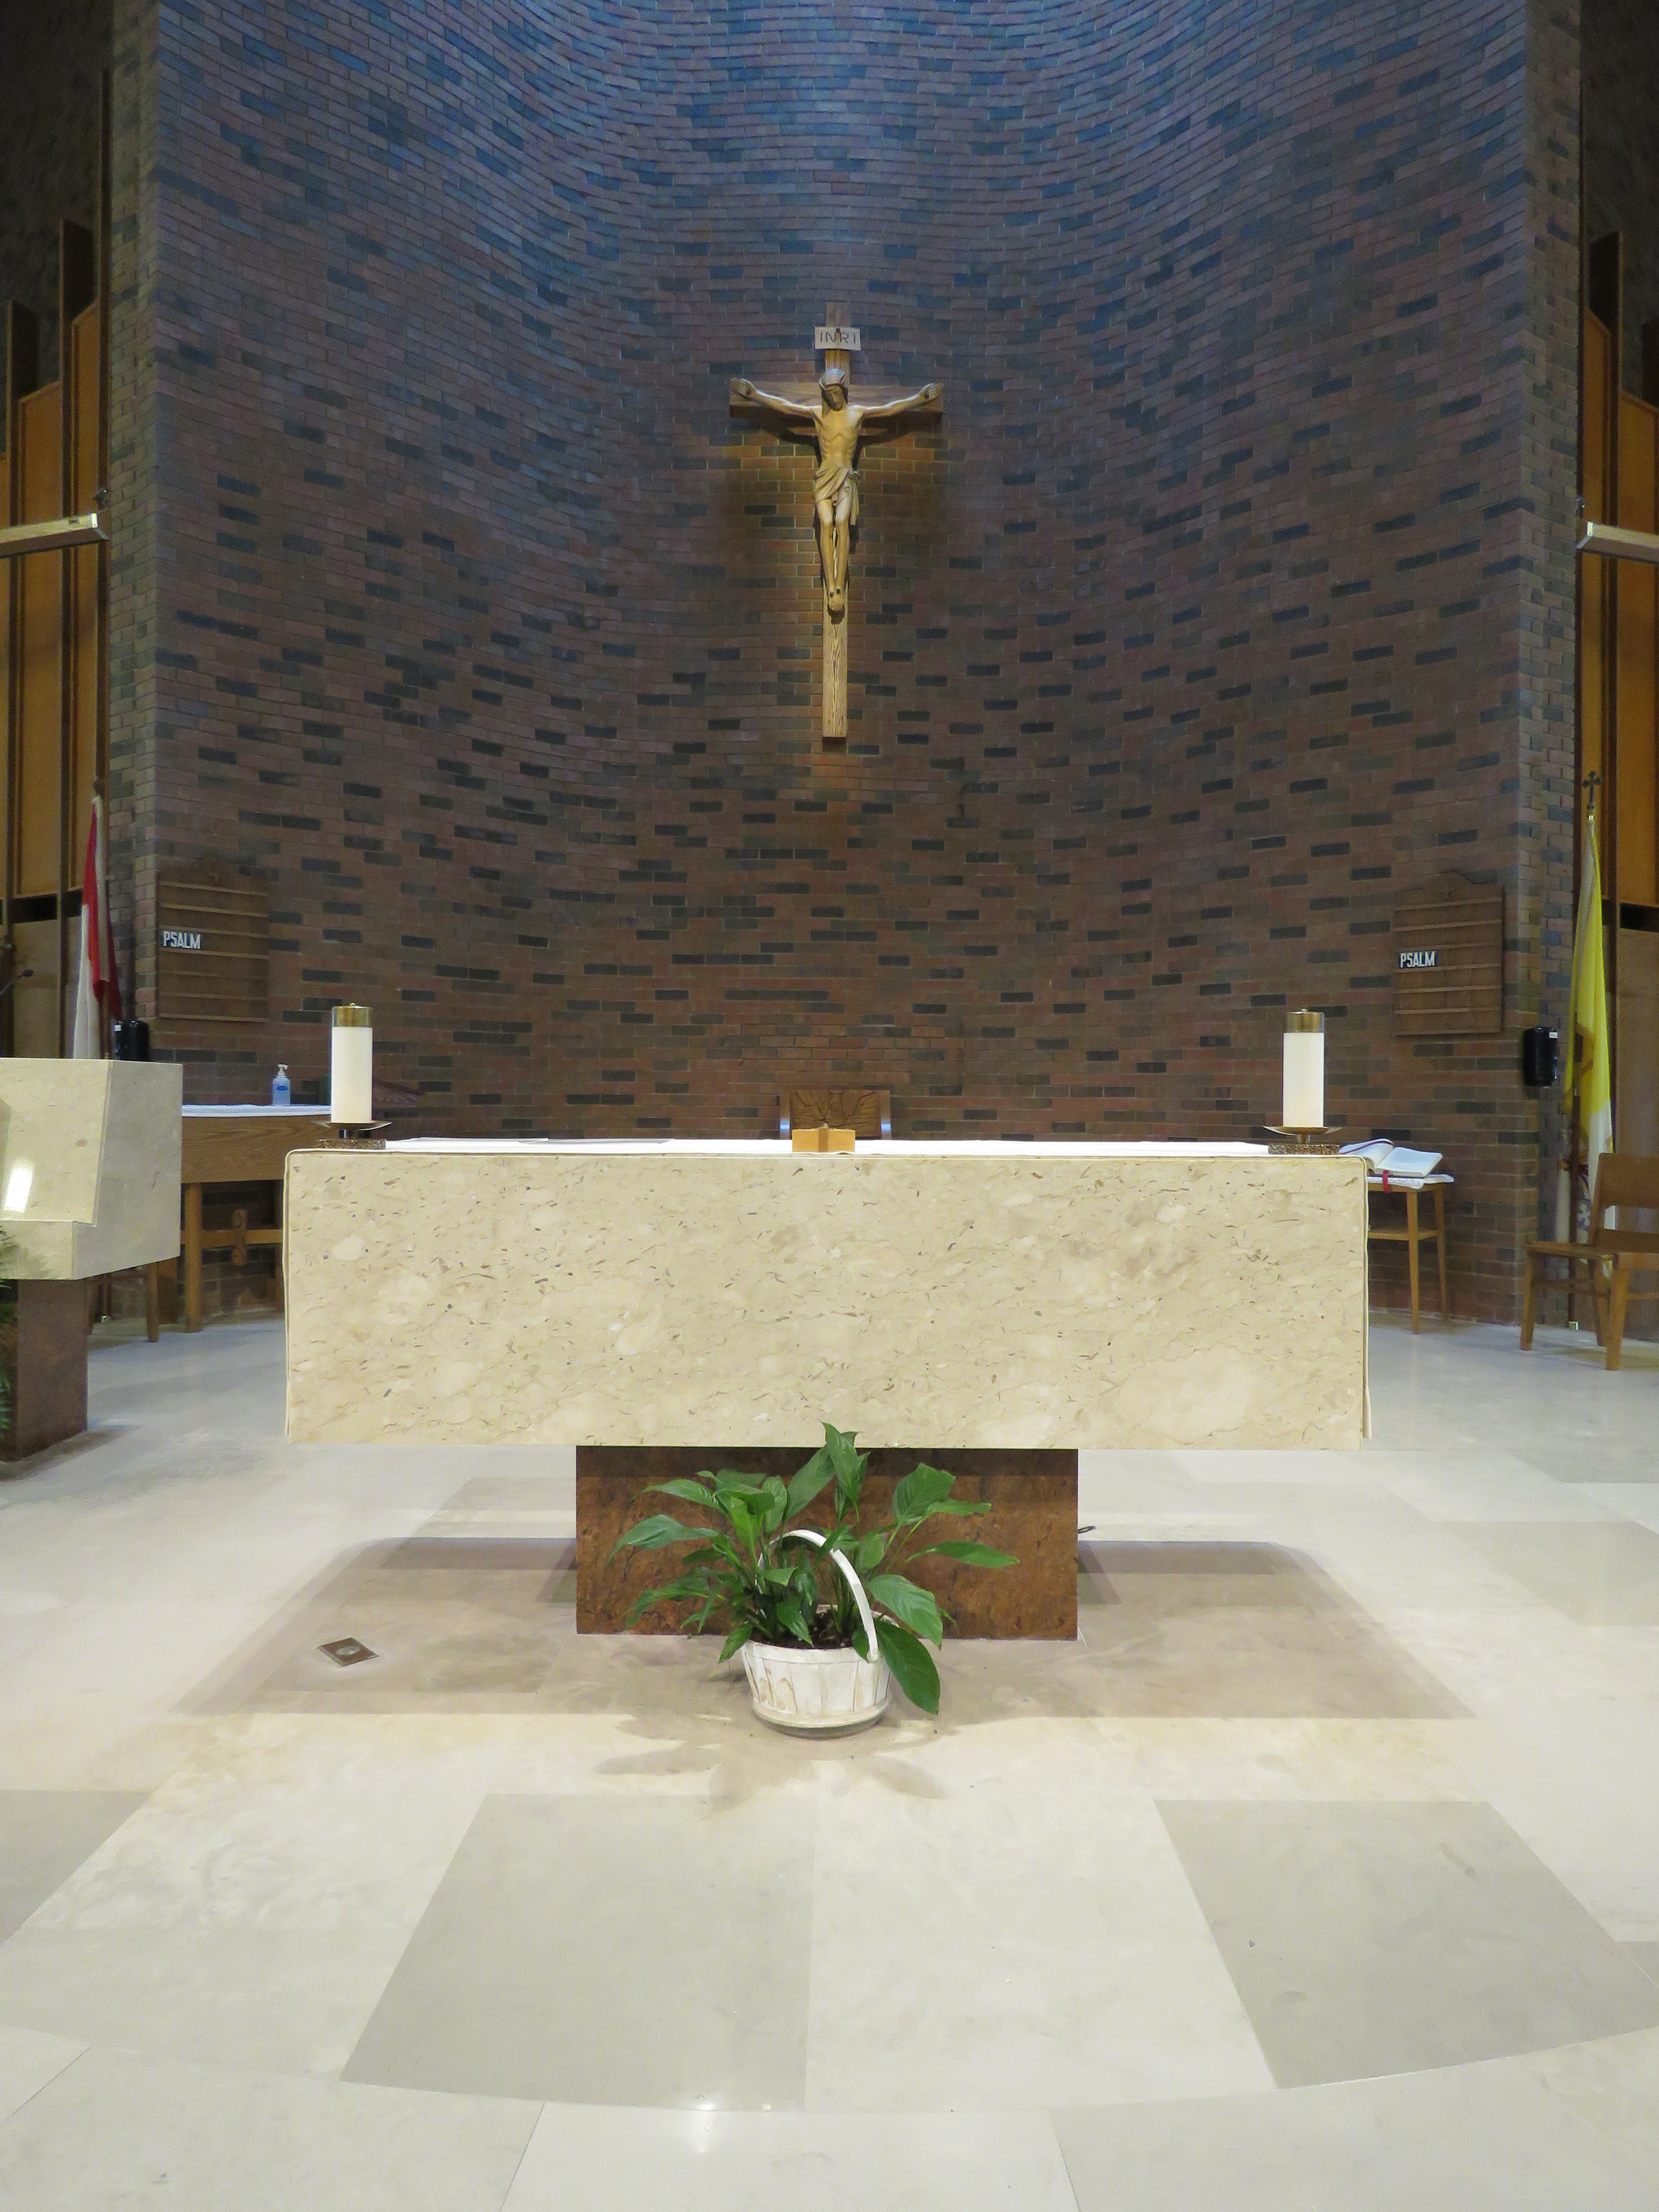 Altar of St. Mary's in Barrie